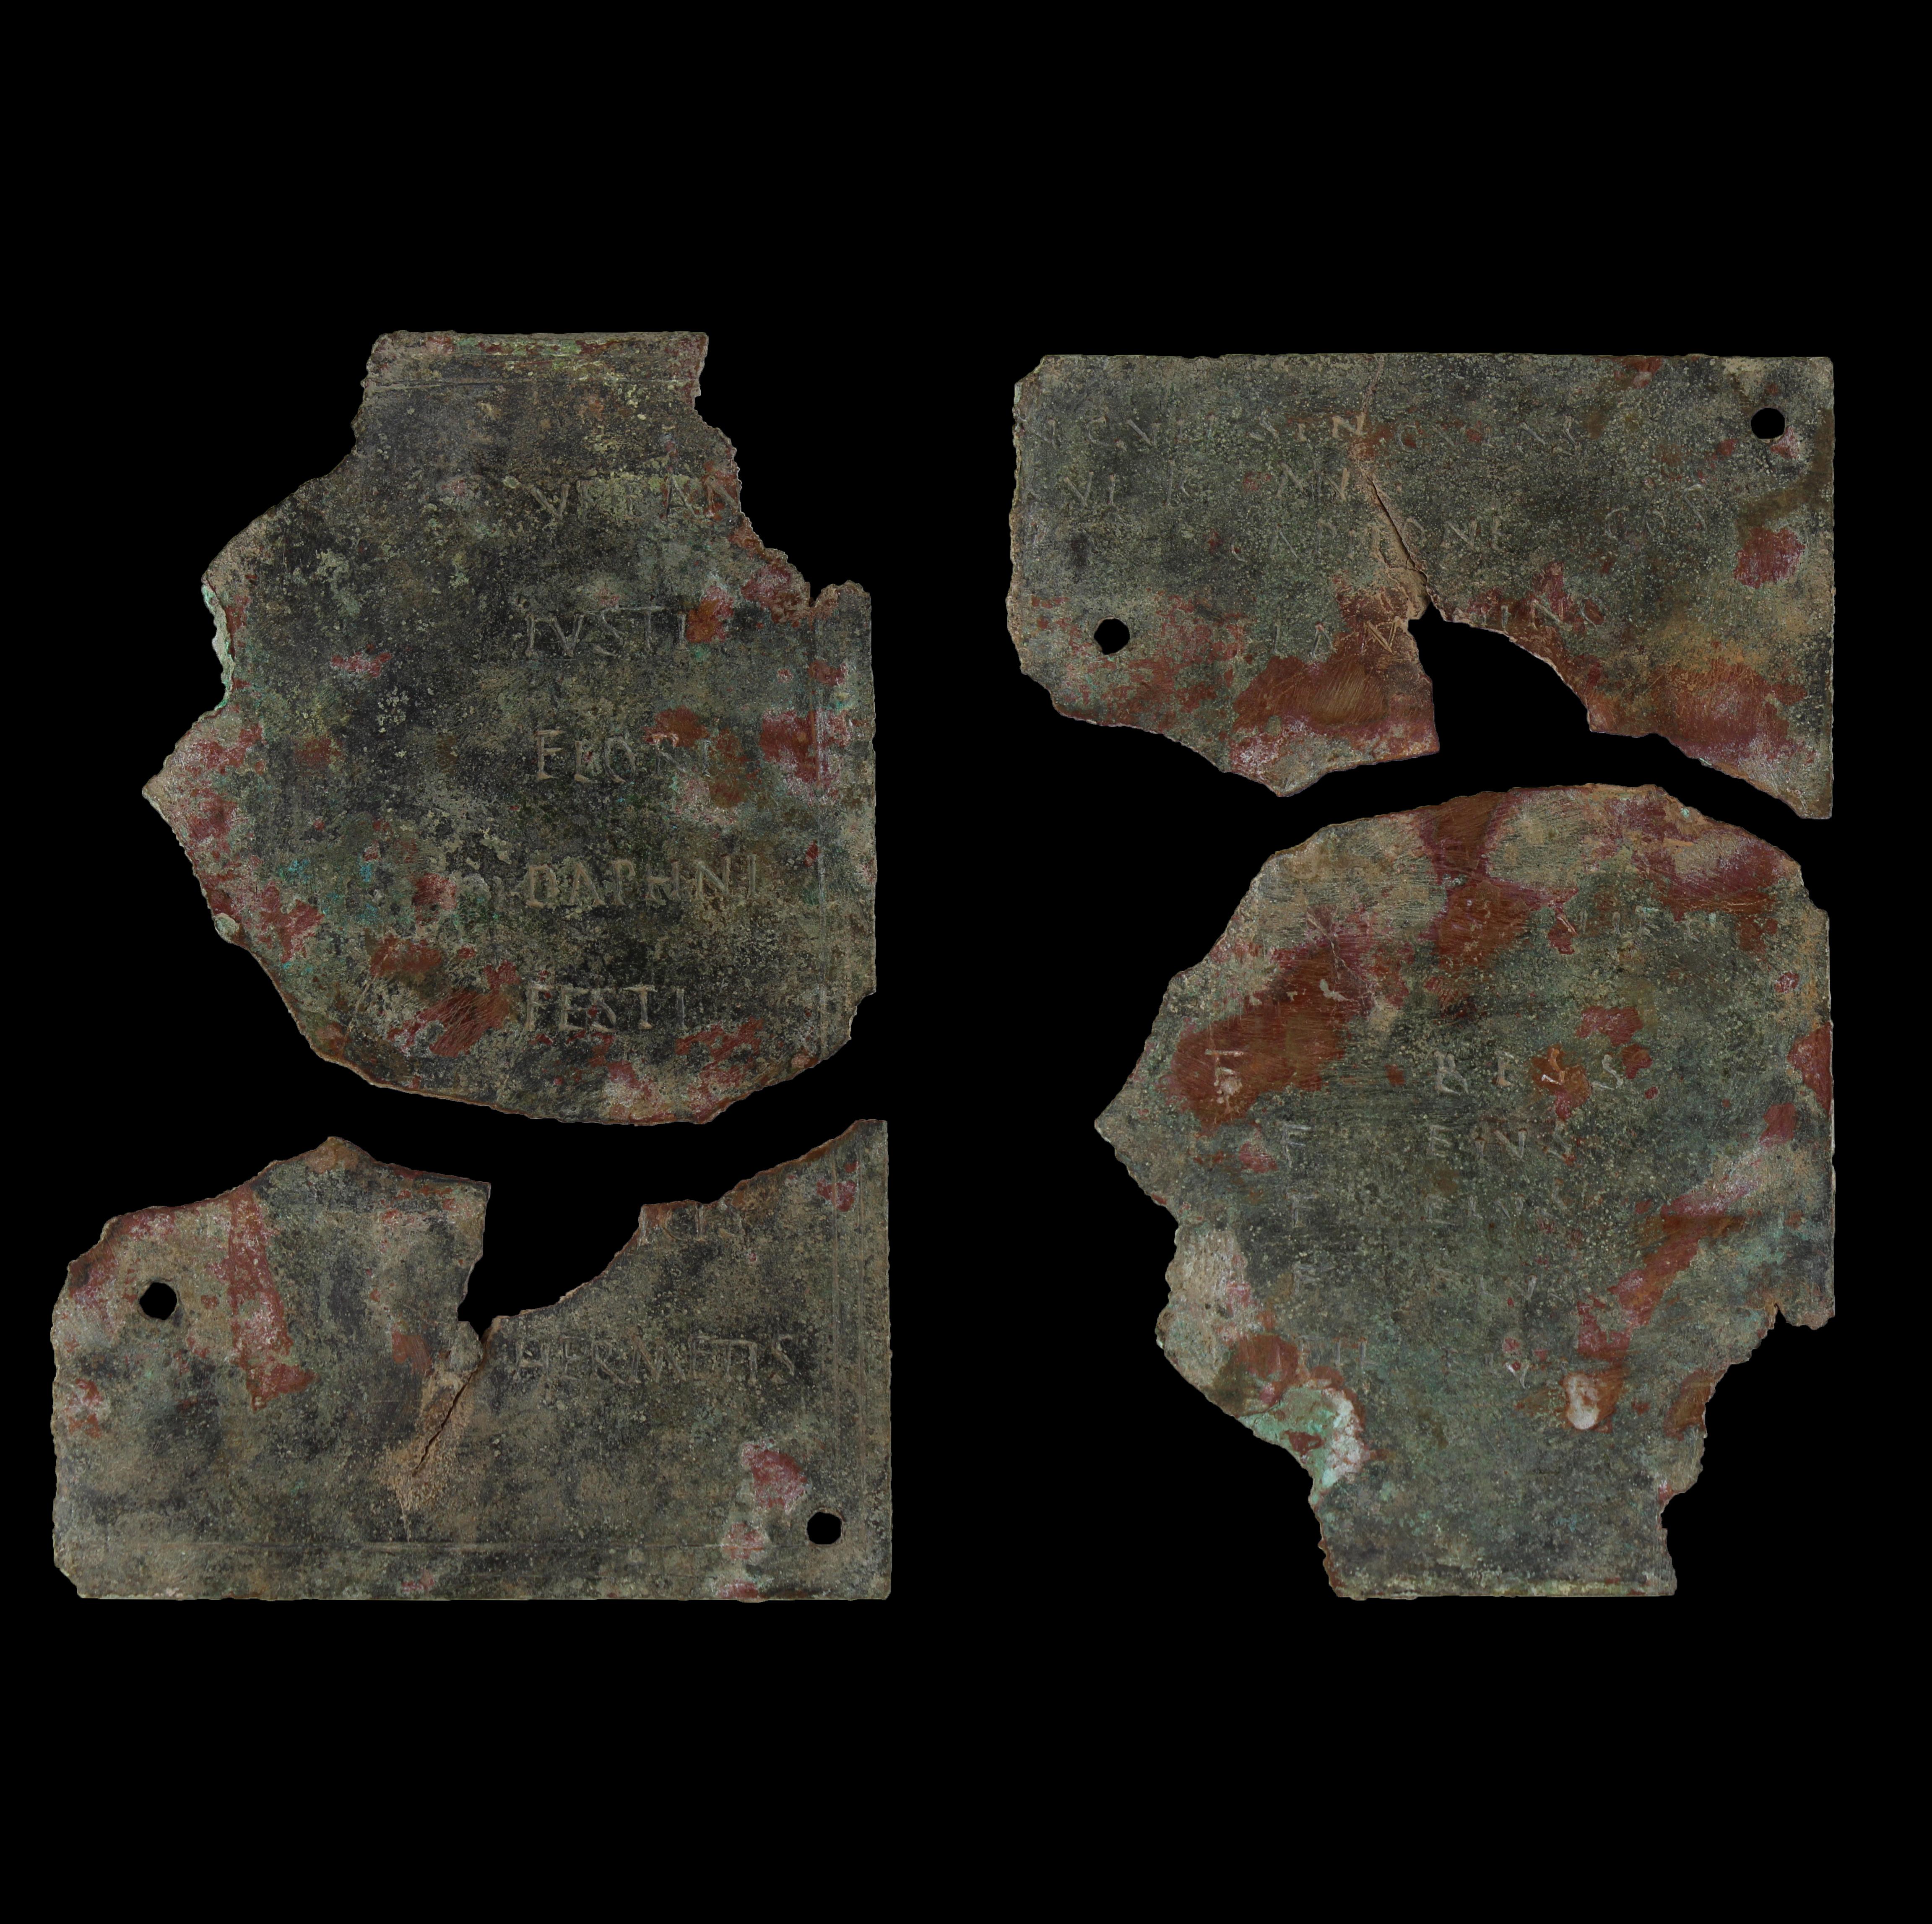 ITEM: Military diploma (fragment)
Material: Bronze
CULTURE: Roman
PERIOD: 122 A.D, Hadrian period
DIMENSIONS: 135 mm x 90 mm, 74,4 gr
CONDITION: Good condition. Includes the publication.
PROVENANCE: Ex American Gallery, acquired in 2015. Ex